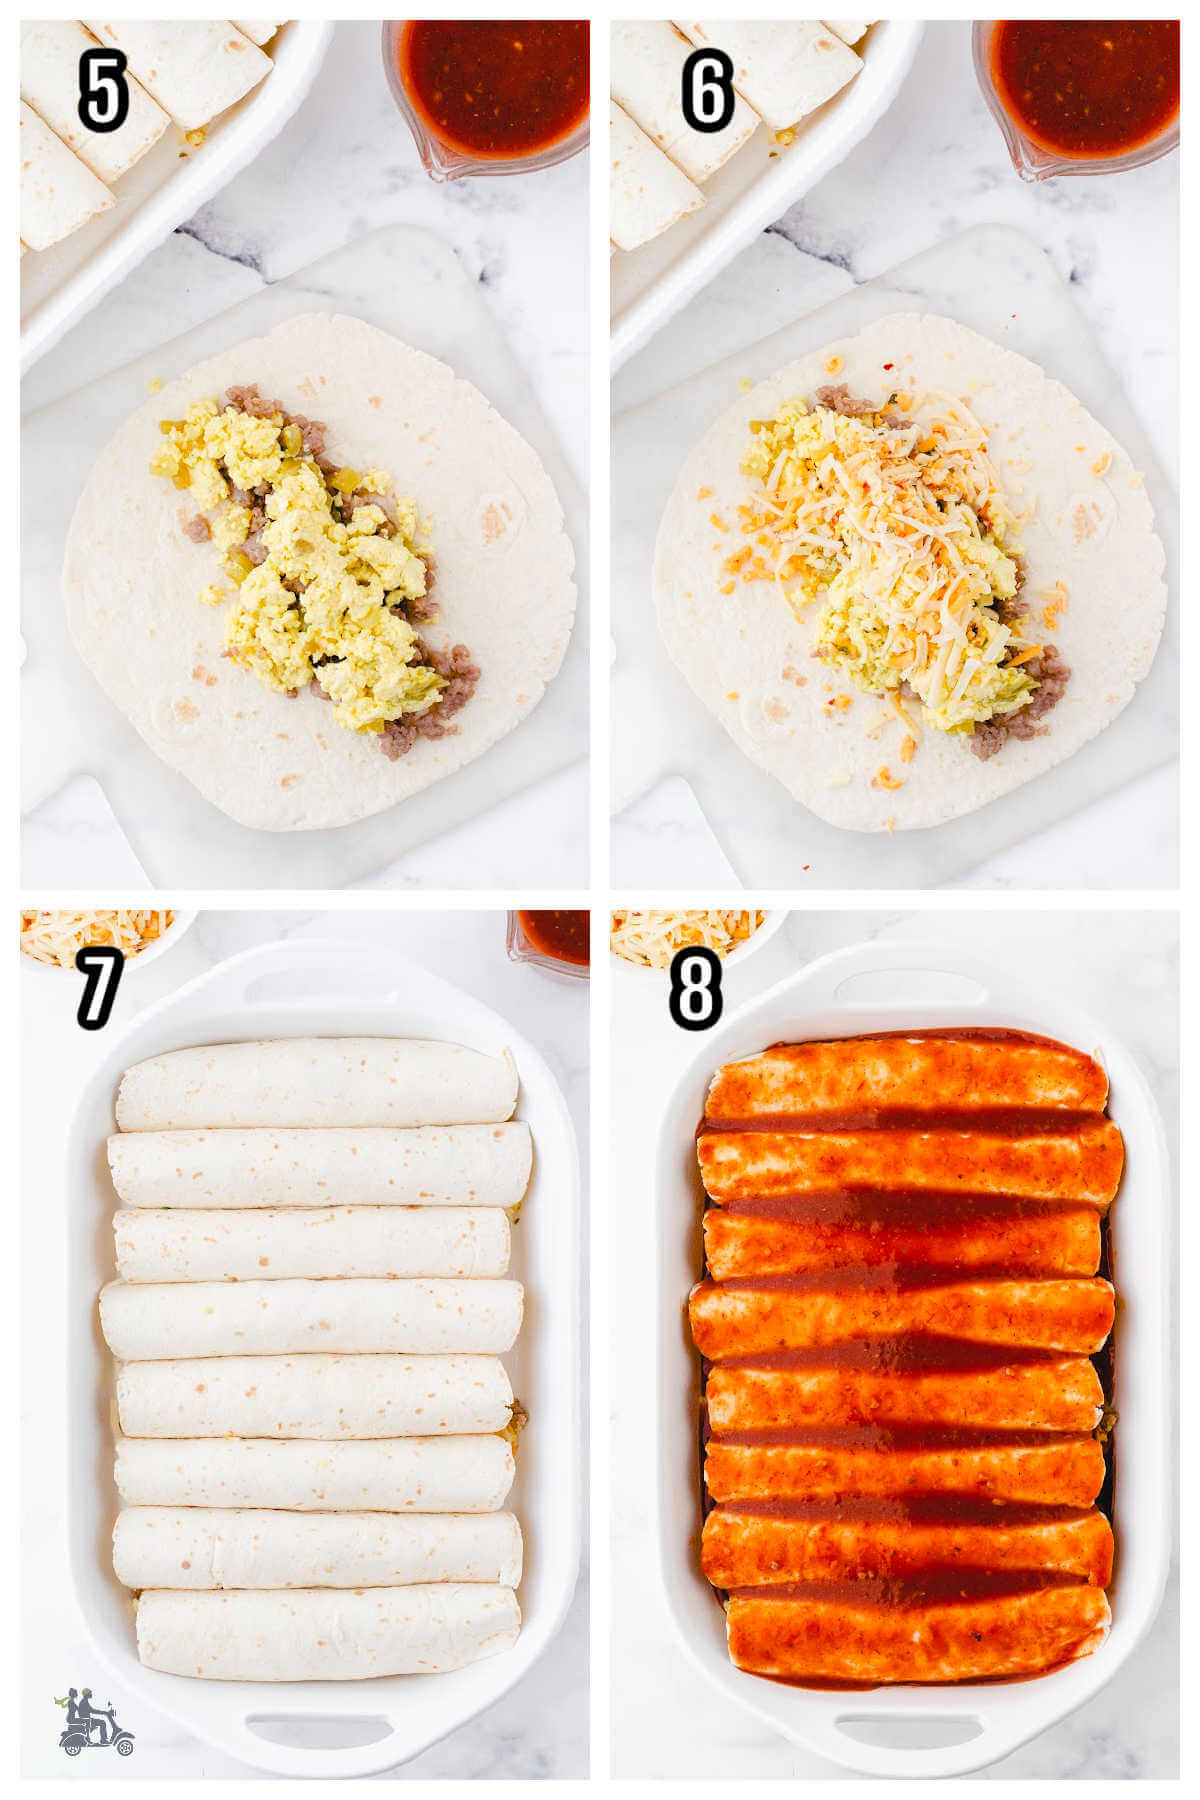 Second set of four steps to making the sausage and egg breakfast enchiladas. 